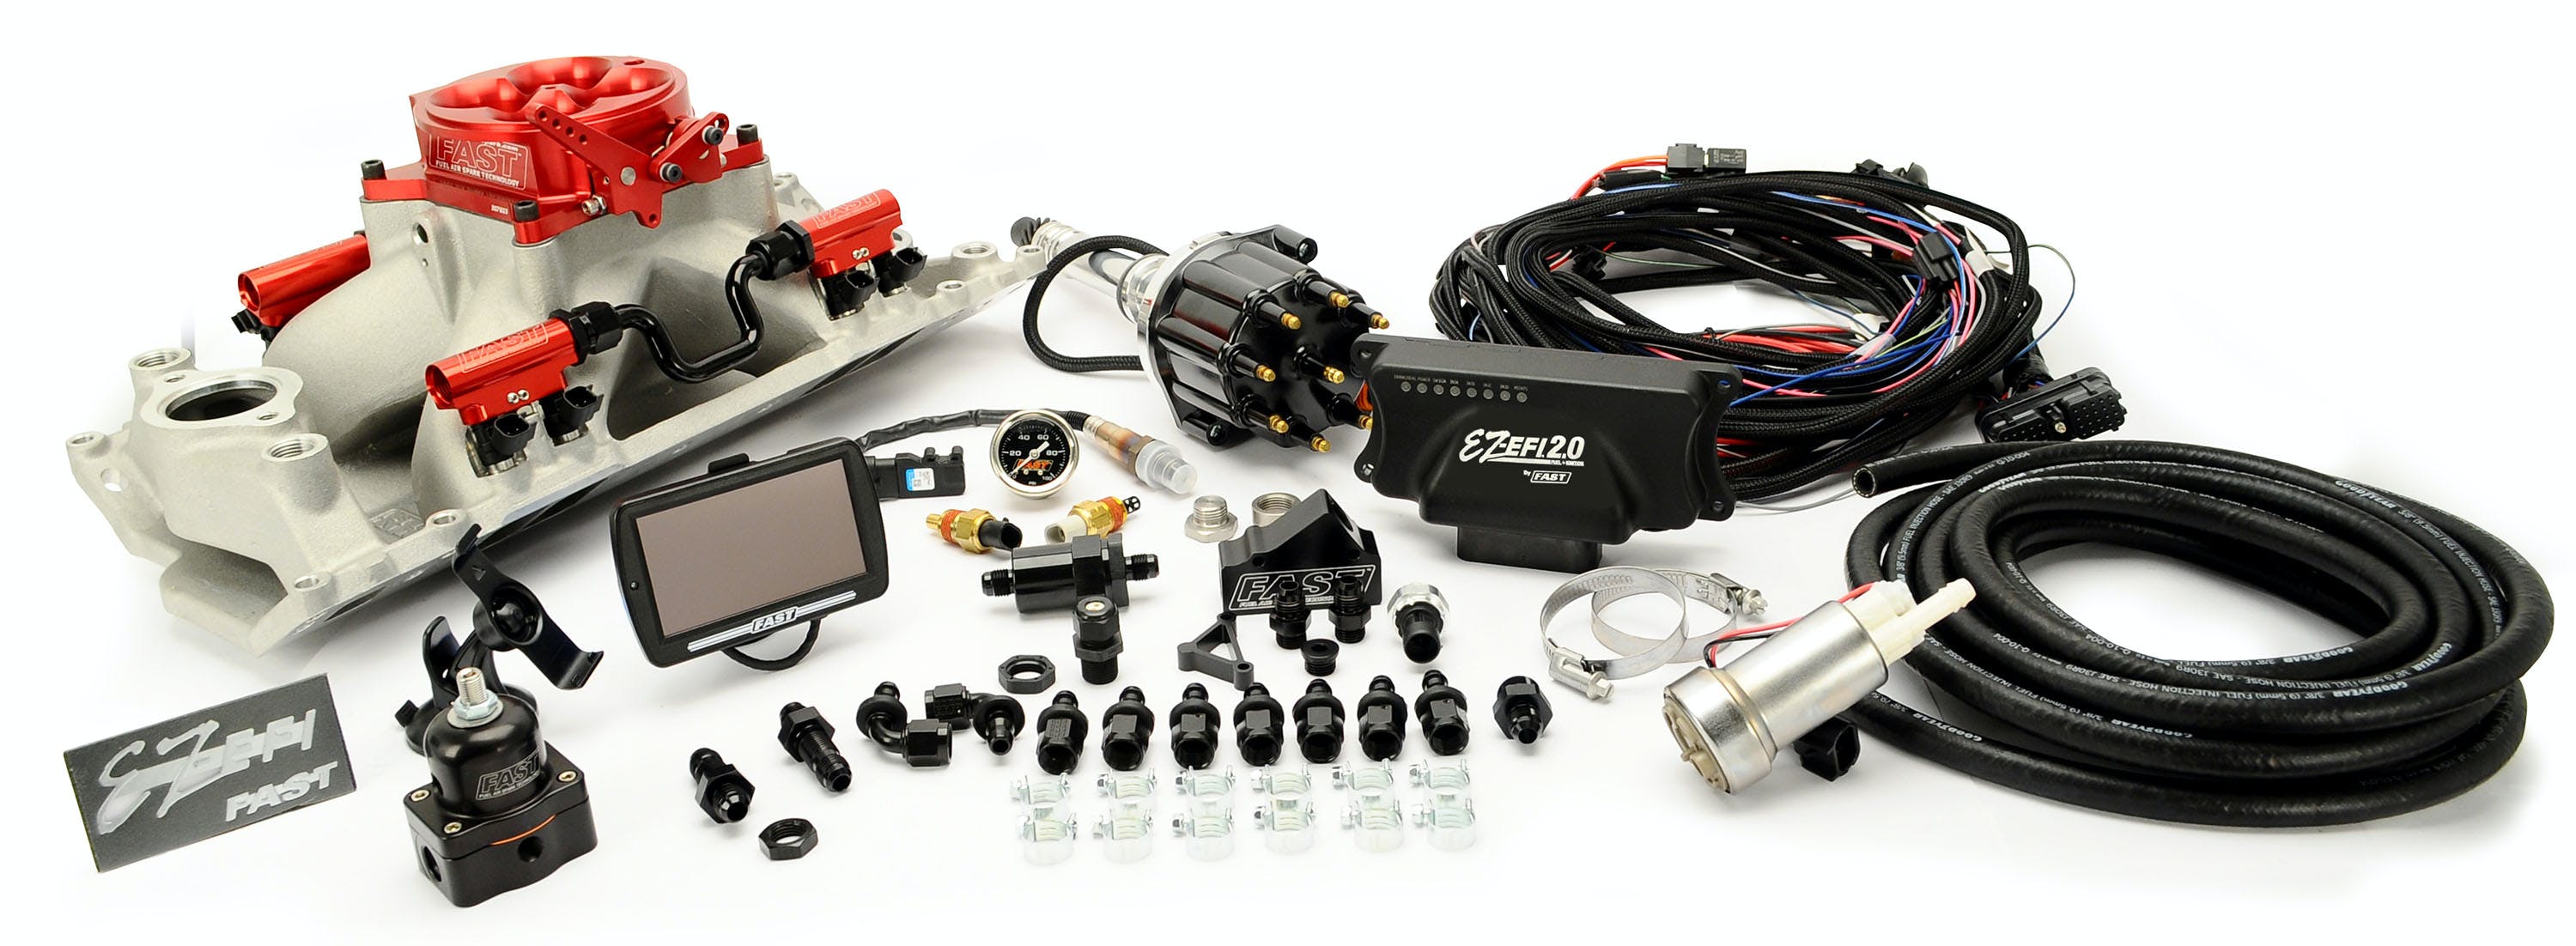 FAST - Fuel Air Spark Technology 30431-05L EZ 2.0 SBF Multiport w/intake, rails, throttle body, distributor and fuel pump